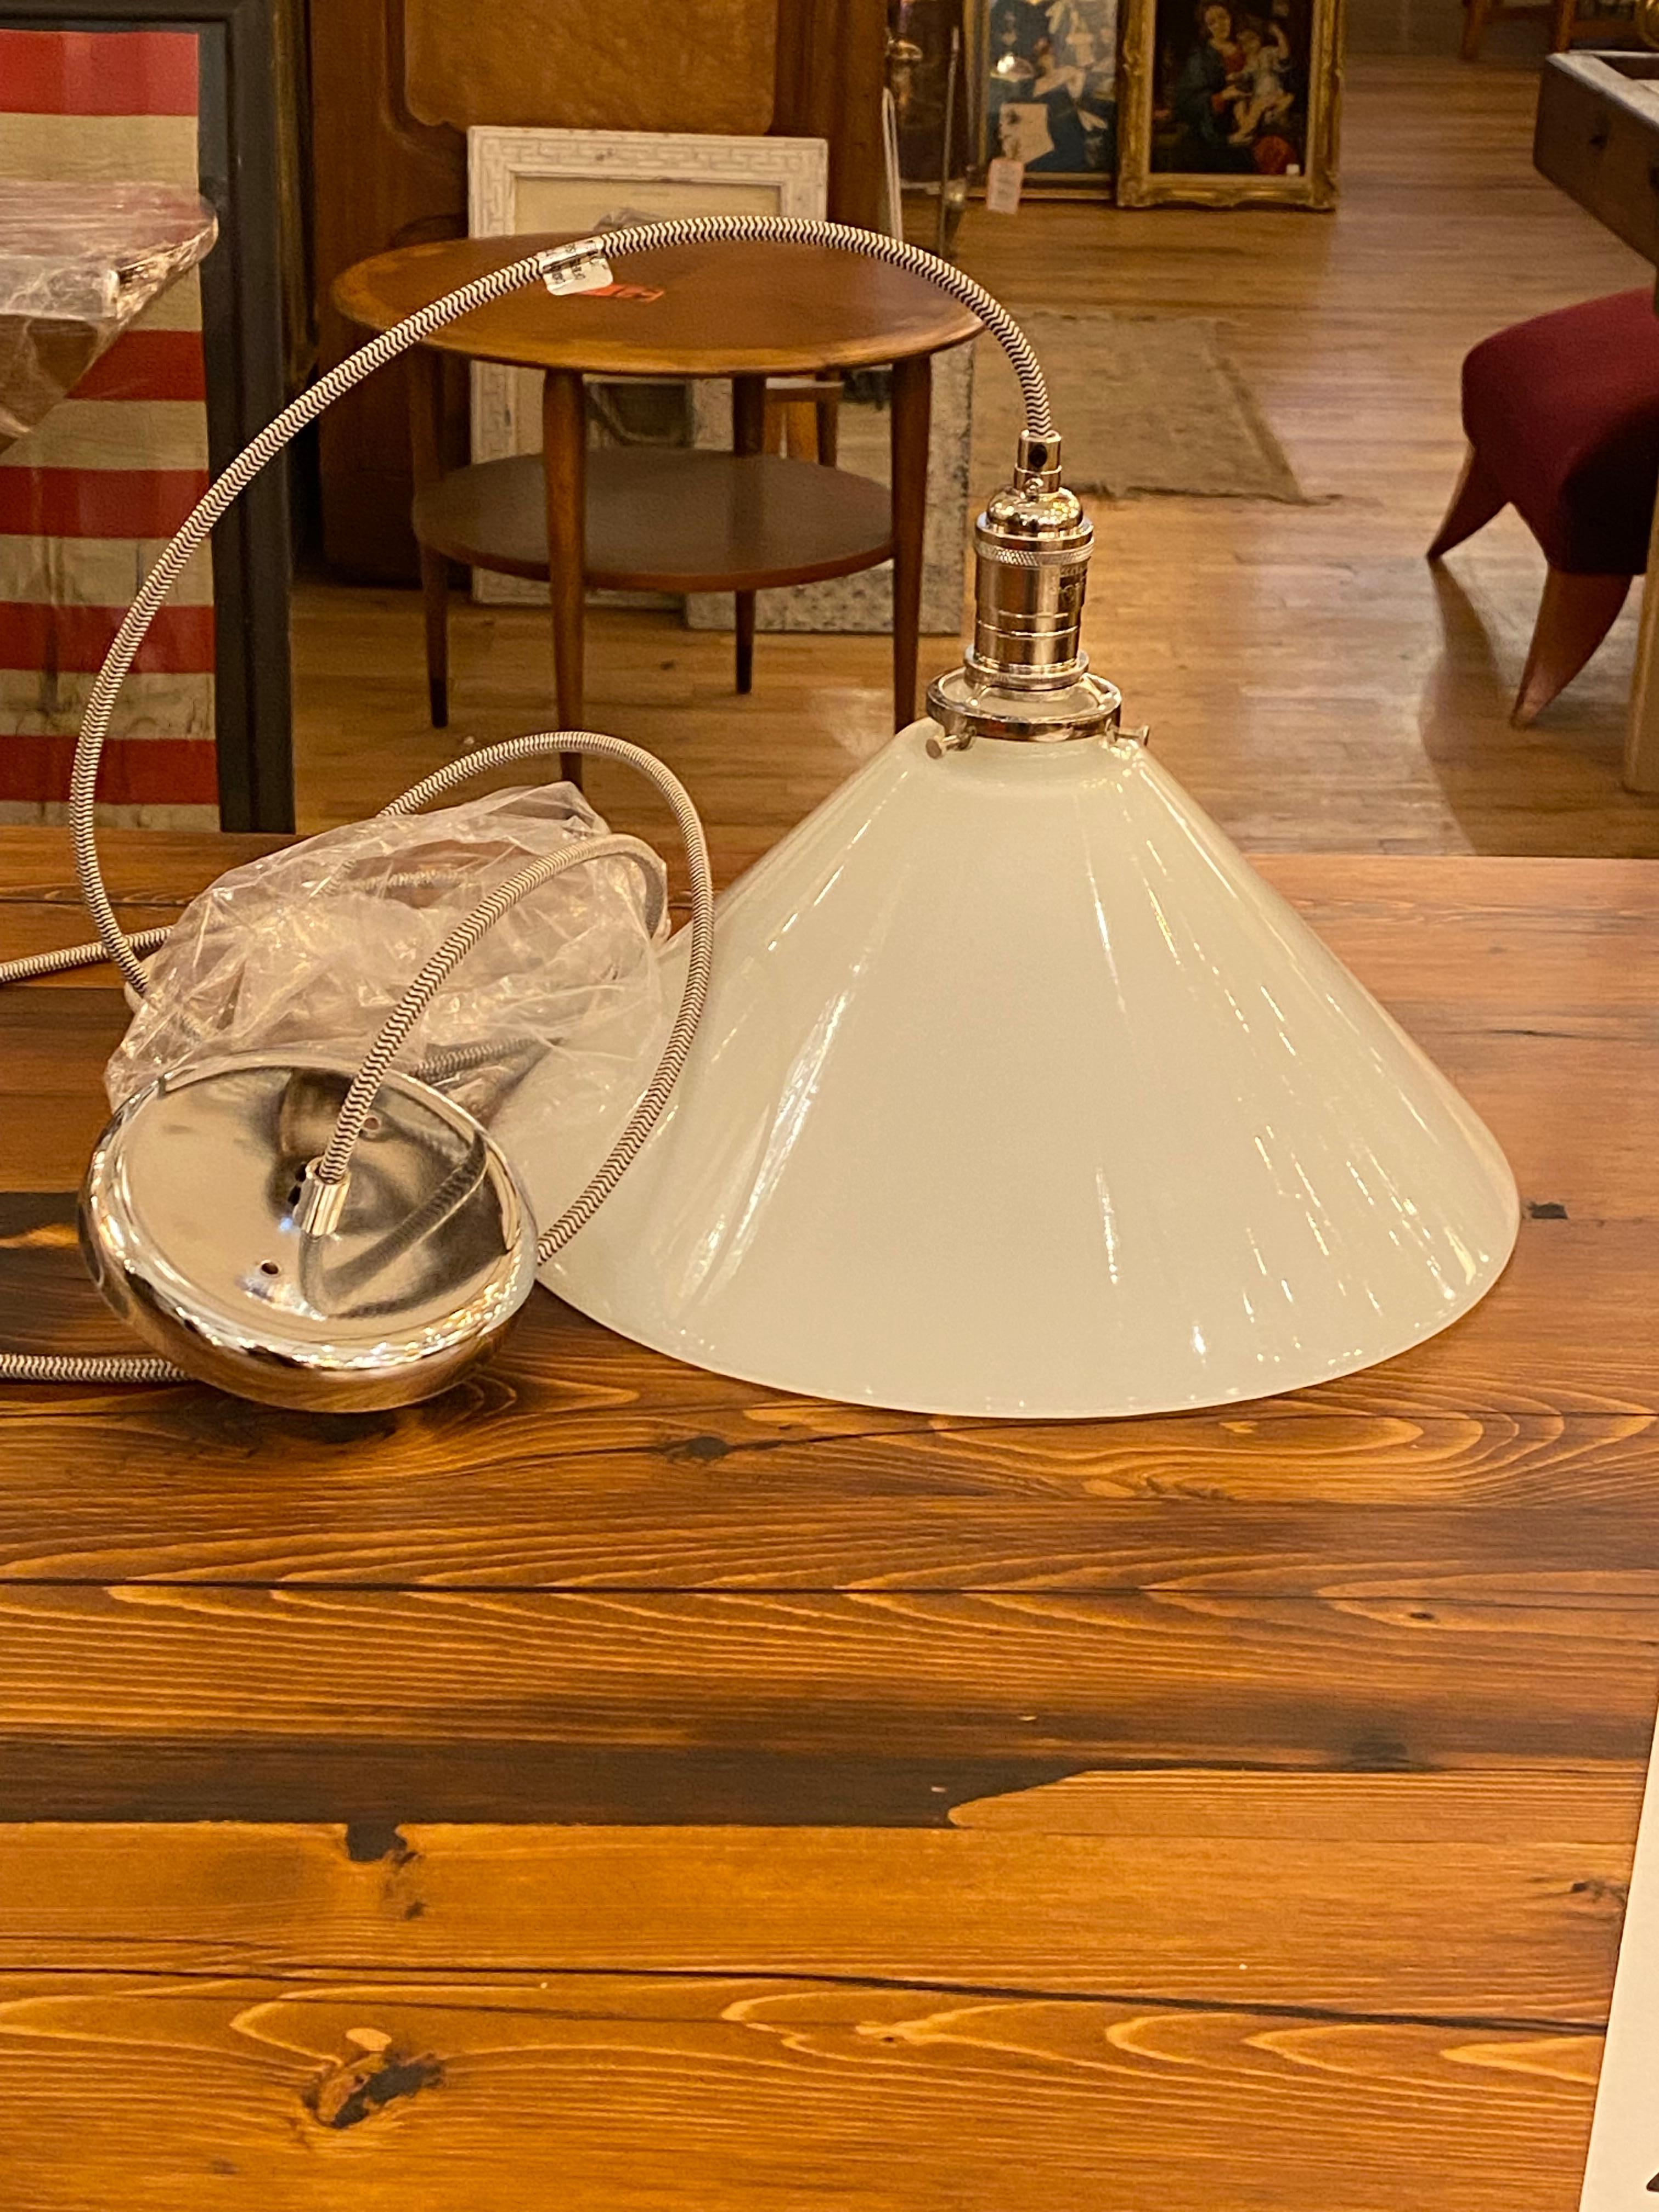 White Cone Glass Pendant Light New Polished Nickel Finish Hardware In Good Condition For Sale In New York, NY